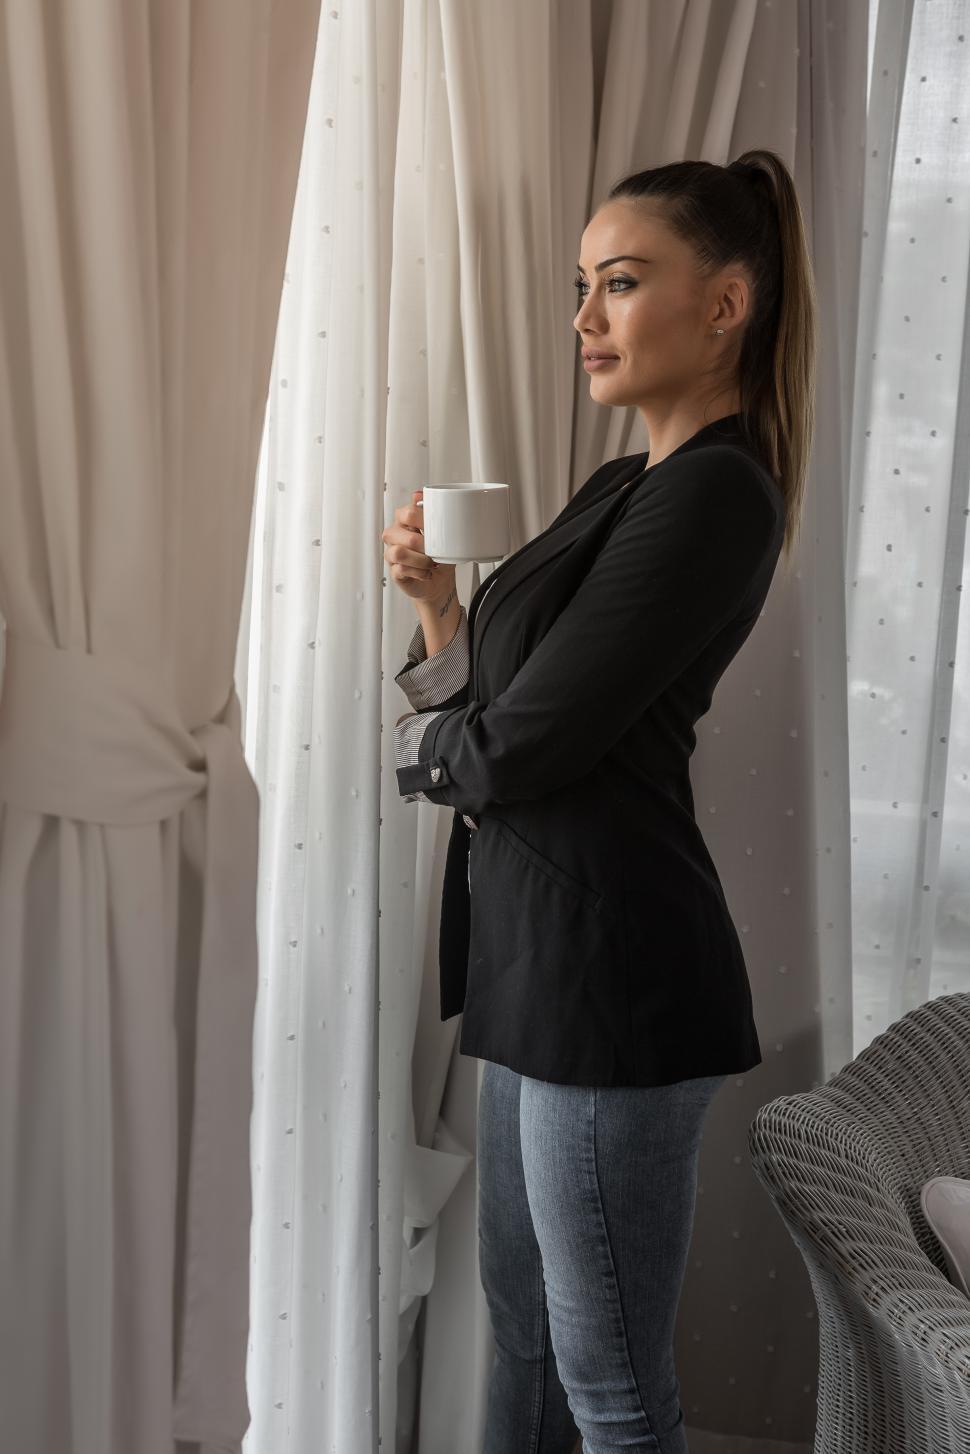 Free Image of Pensive young female standing with tea cup 